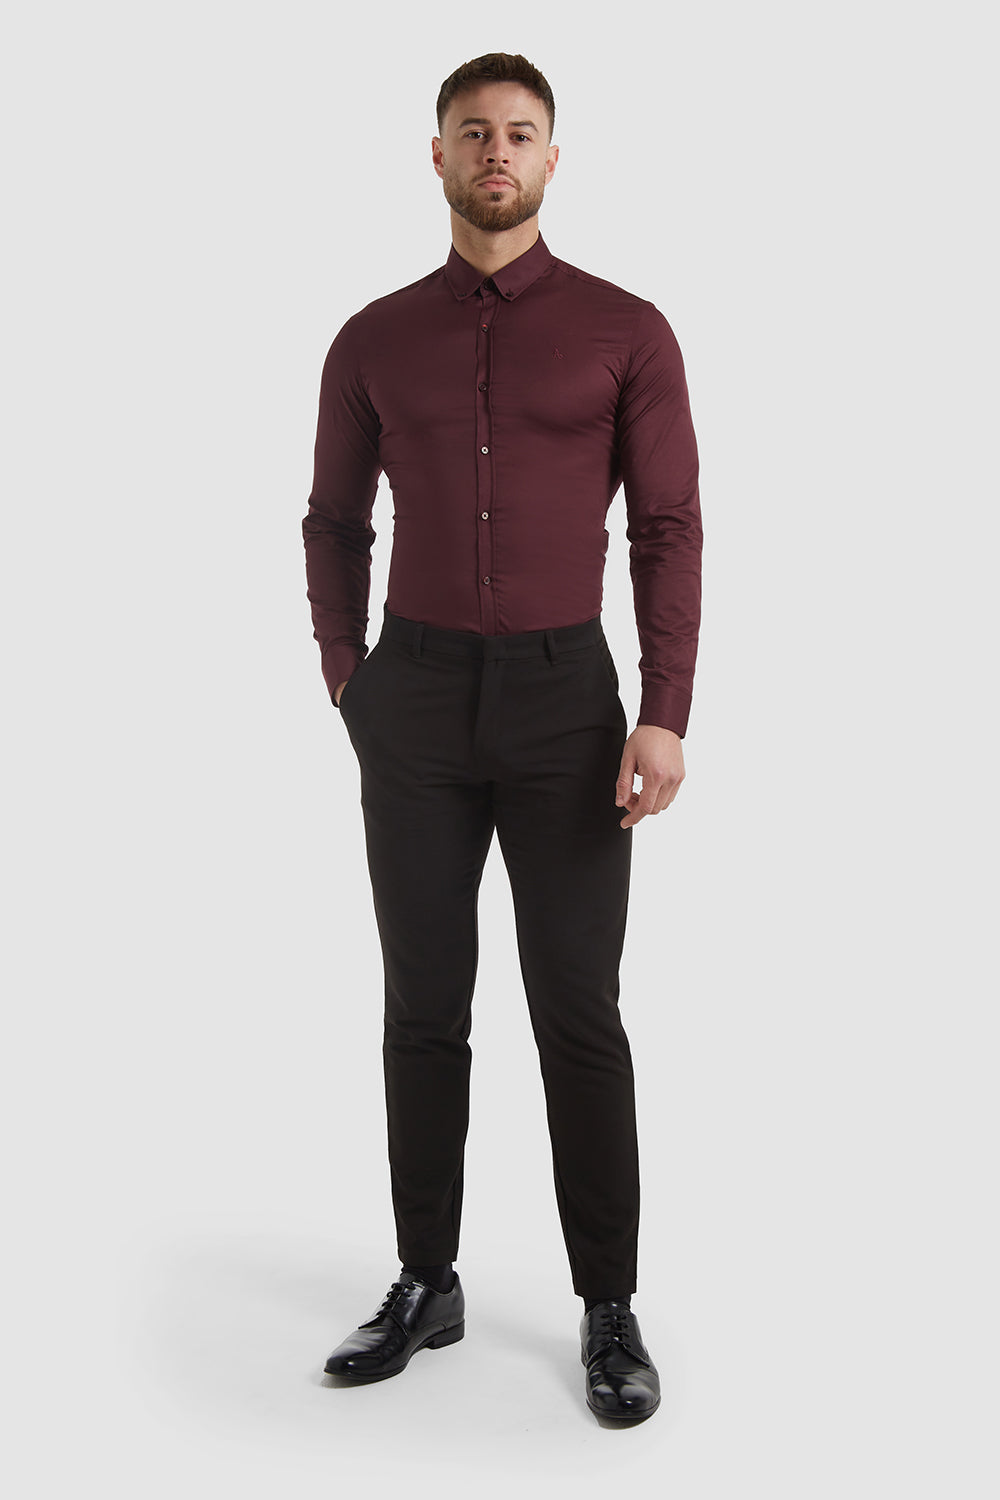 What colors go well with burgundy pants? - Quora